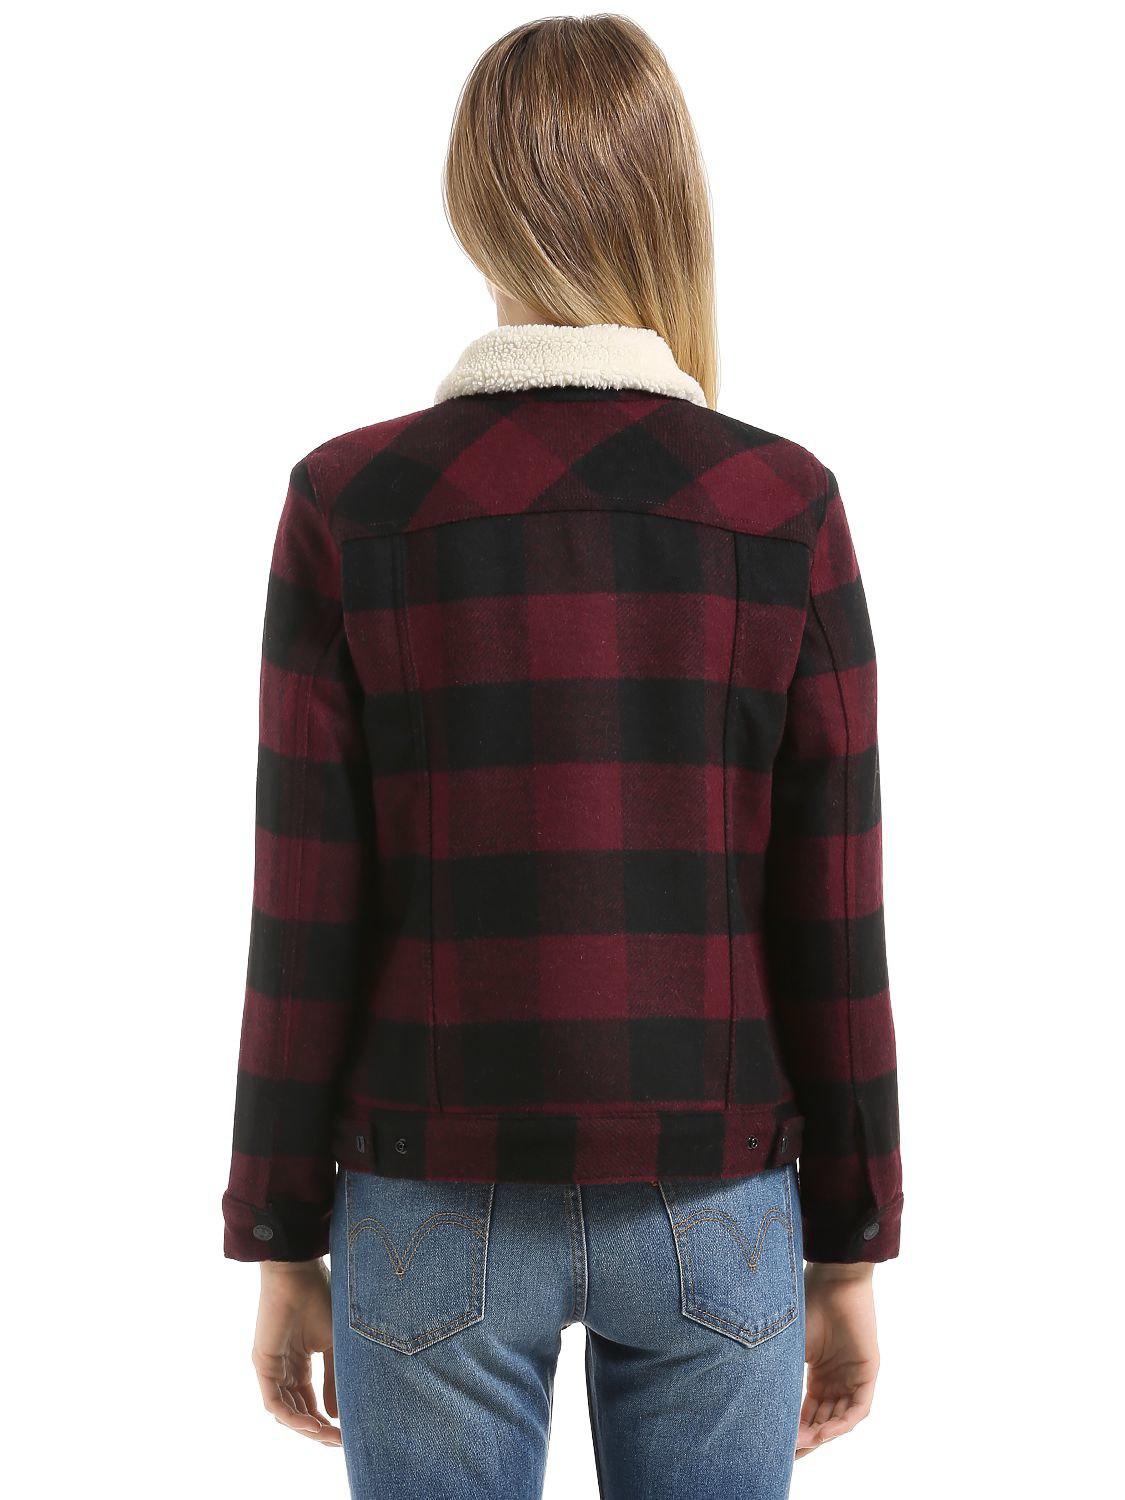 Levi's Plaid Wool Trucker Jacket in Red/Black (Red) - Lyst